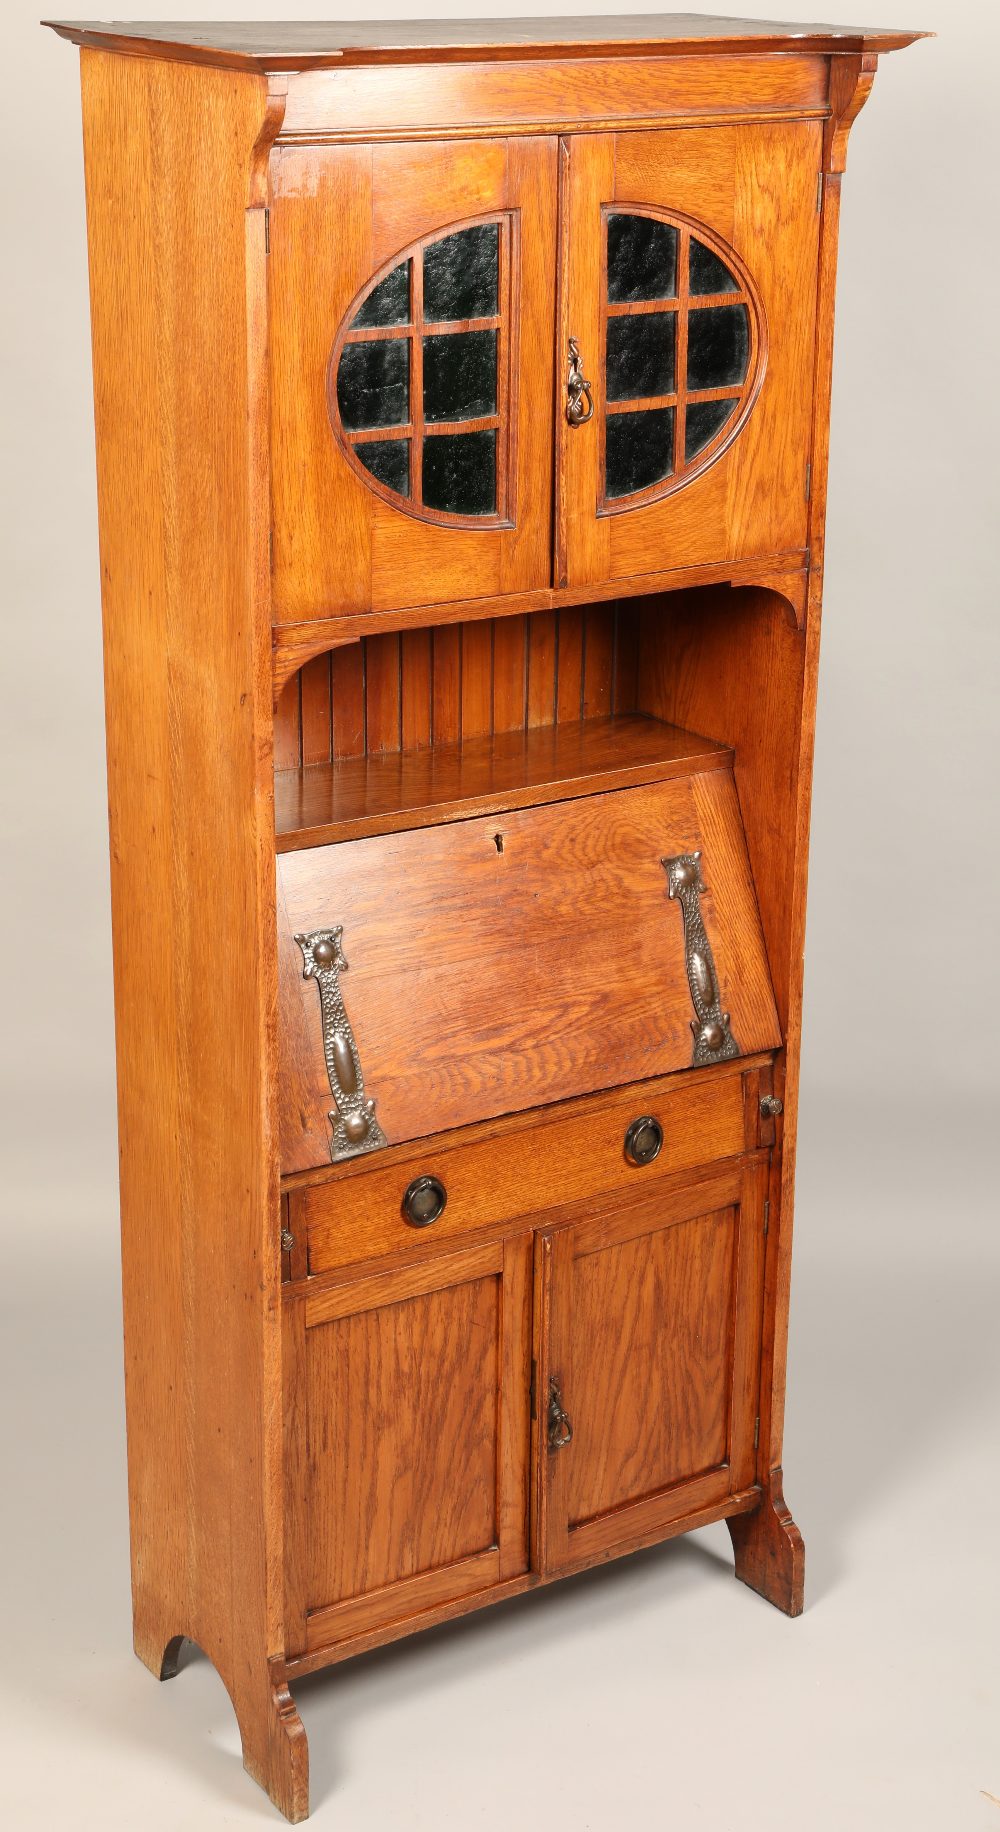 Arts and crafts oak bureau bookcase, with copped stylized mounts, green glazed top cupboard, 179 x - Image 2 of 3